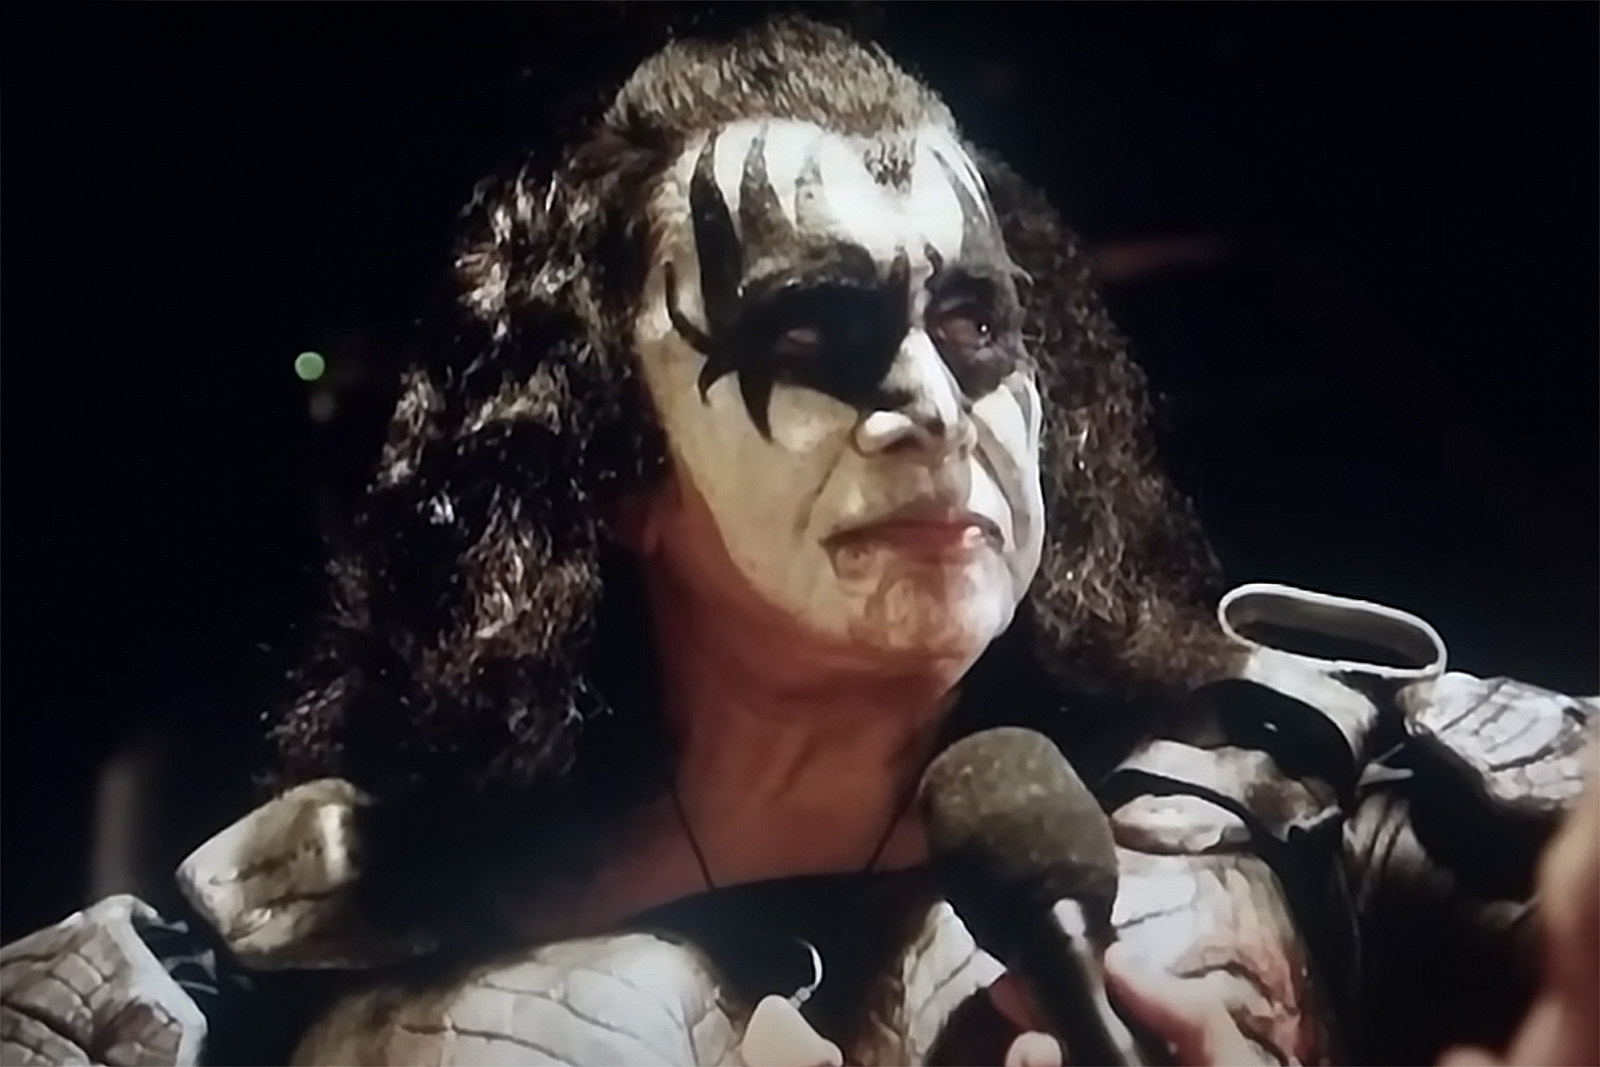 Gene Simmons Credits Family For Making It to End of the Road